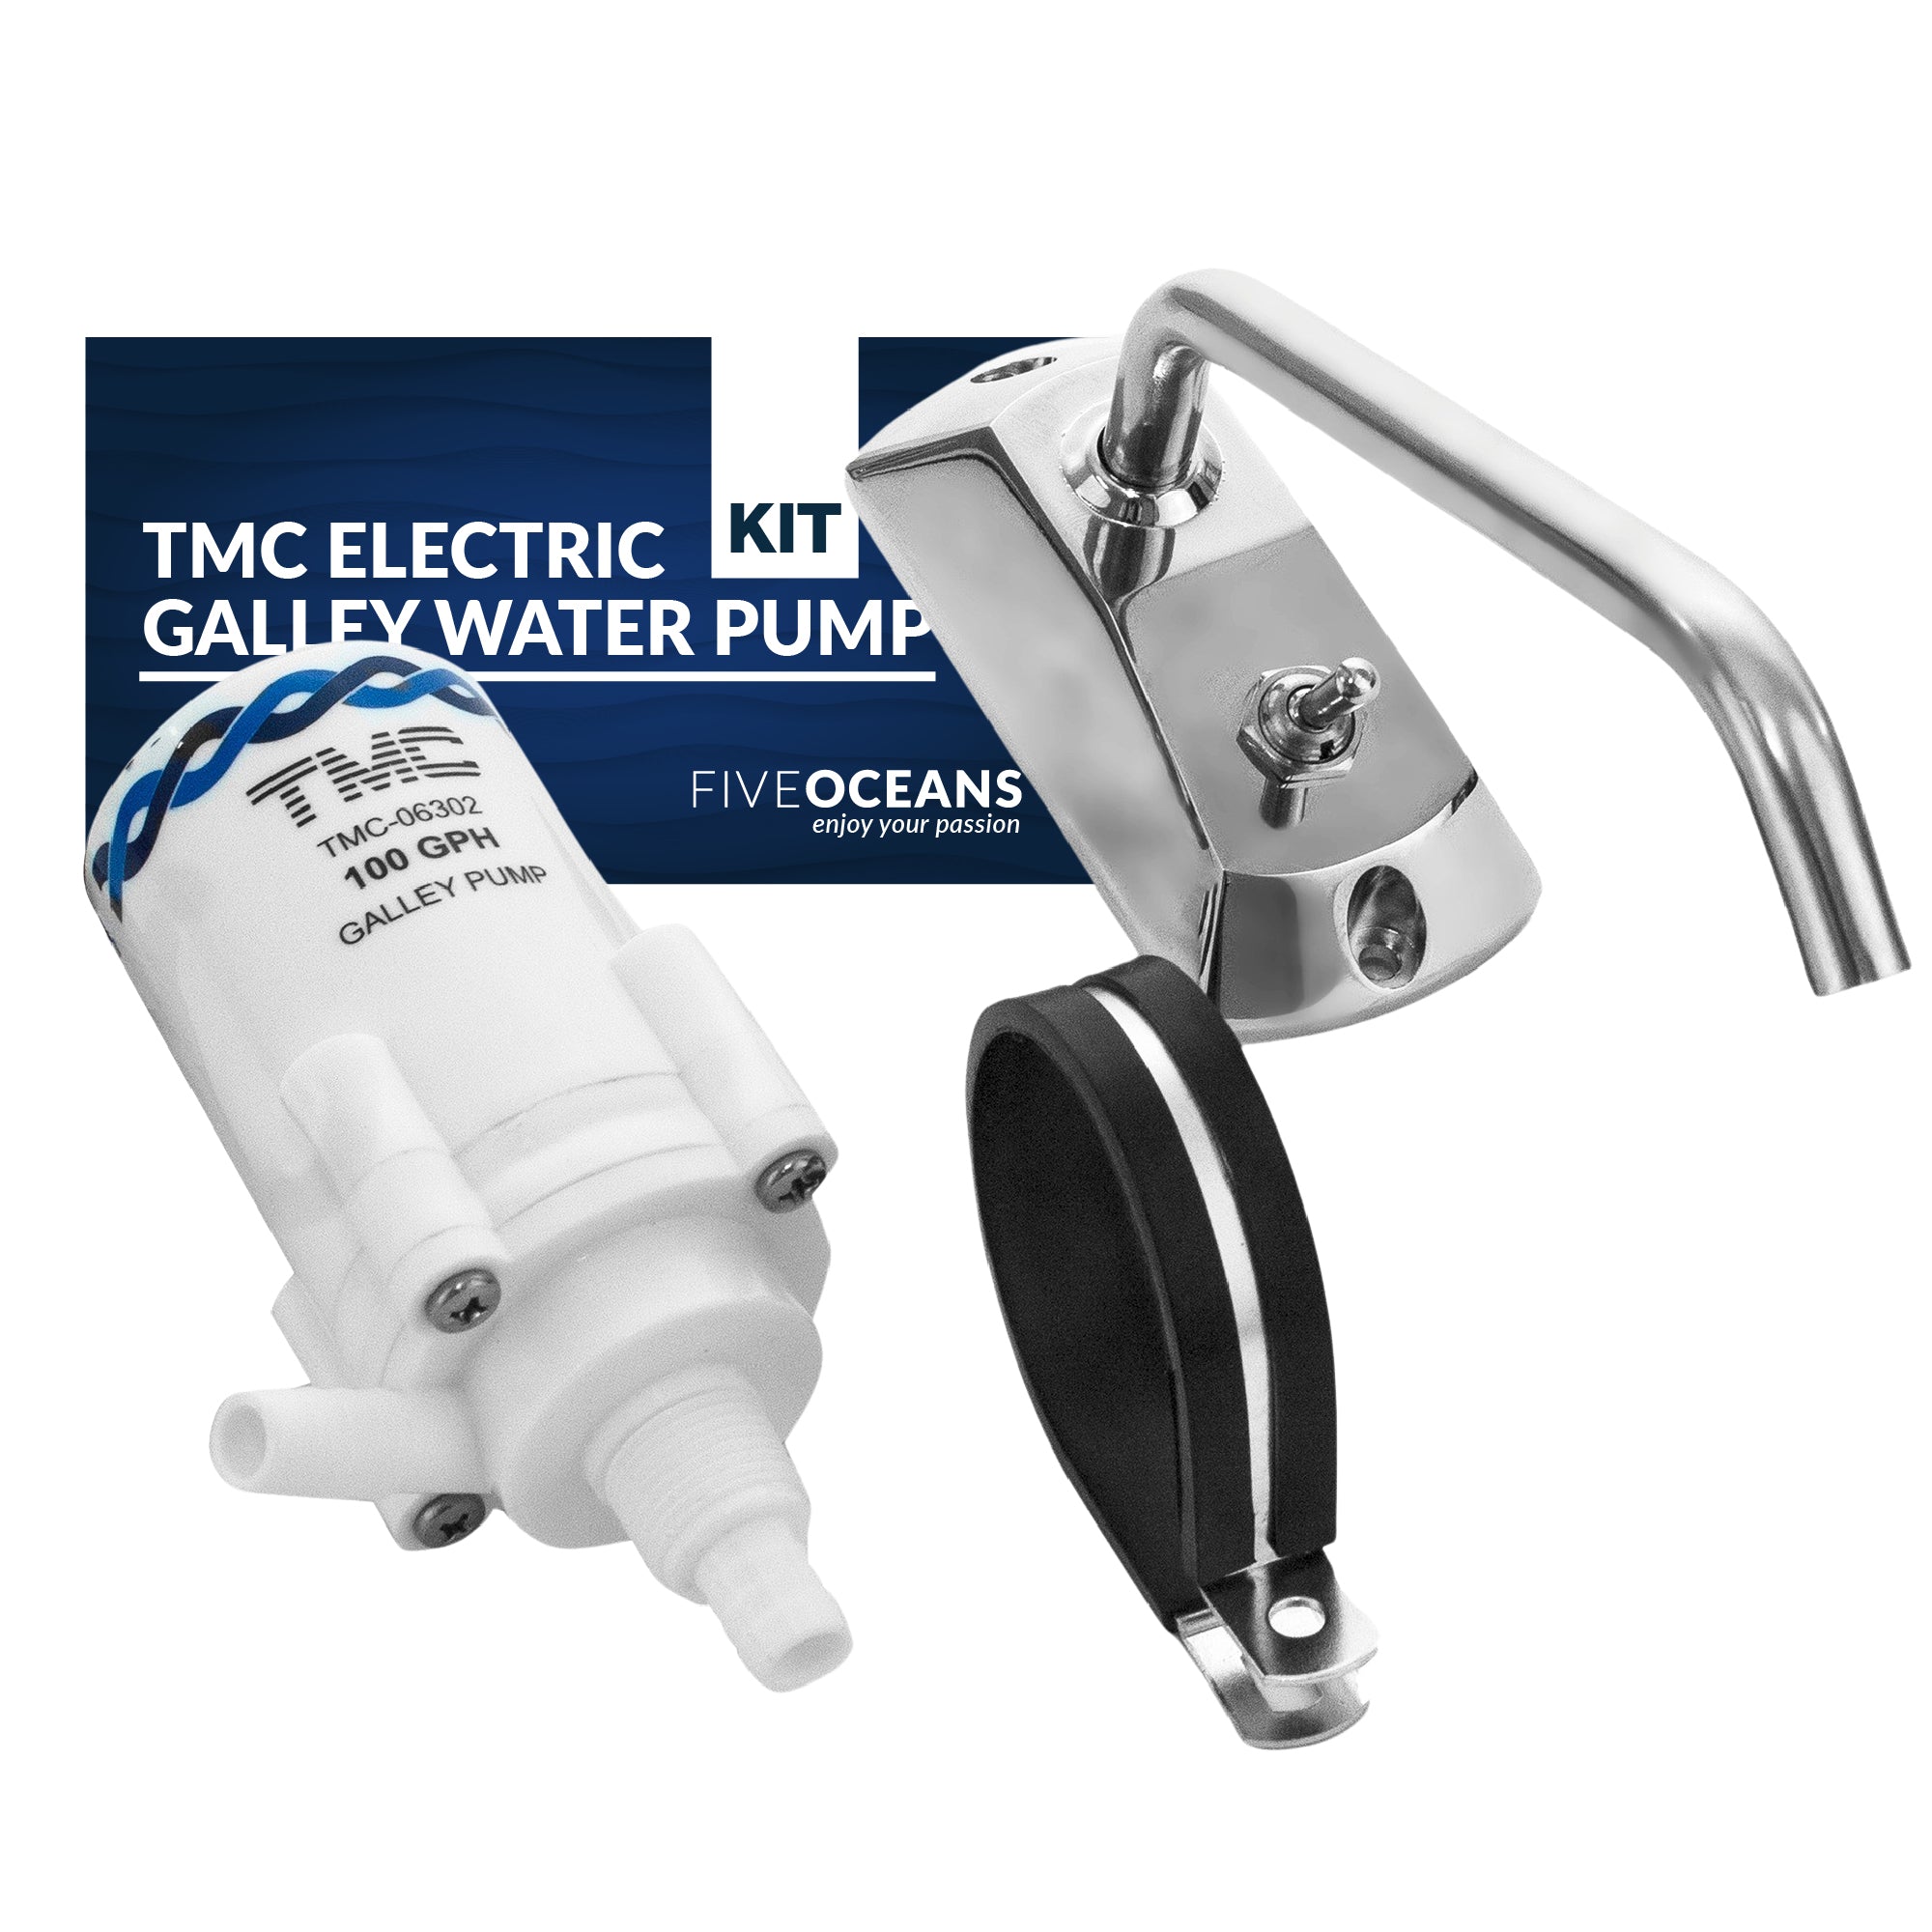 TMC Electric Galley Water Pump Kit with Faucet - FO738